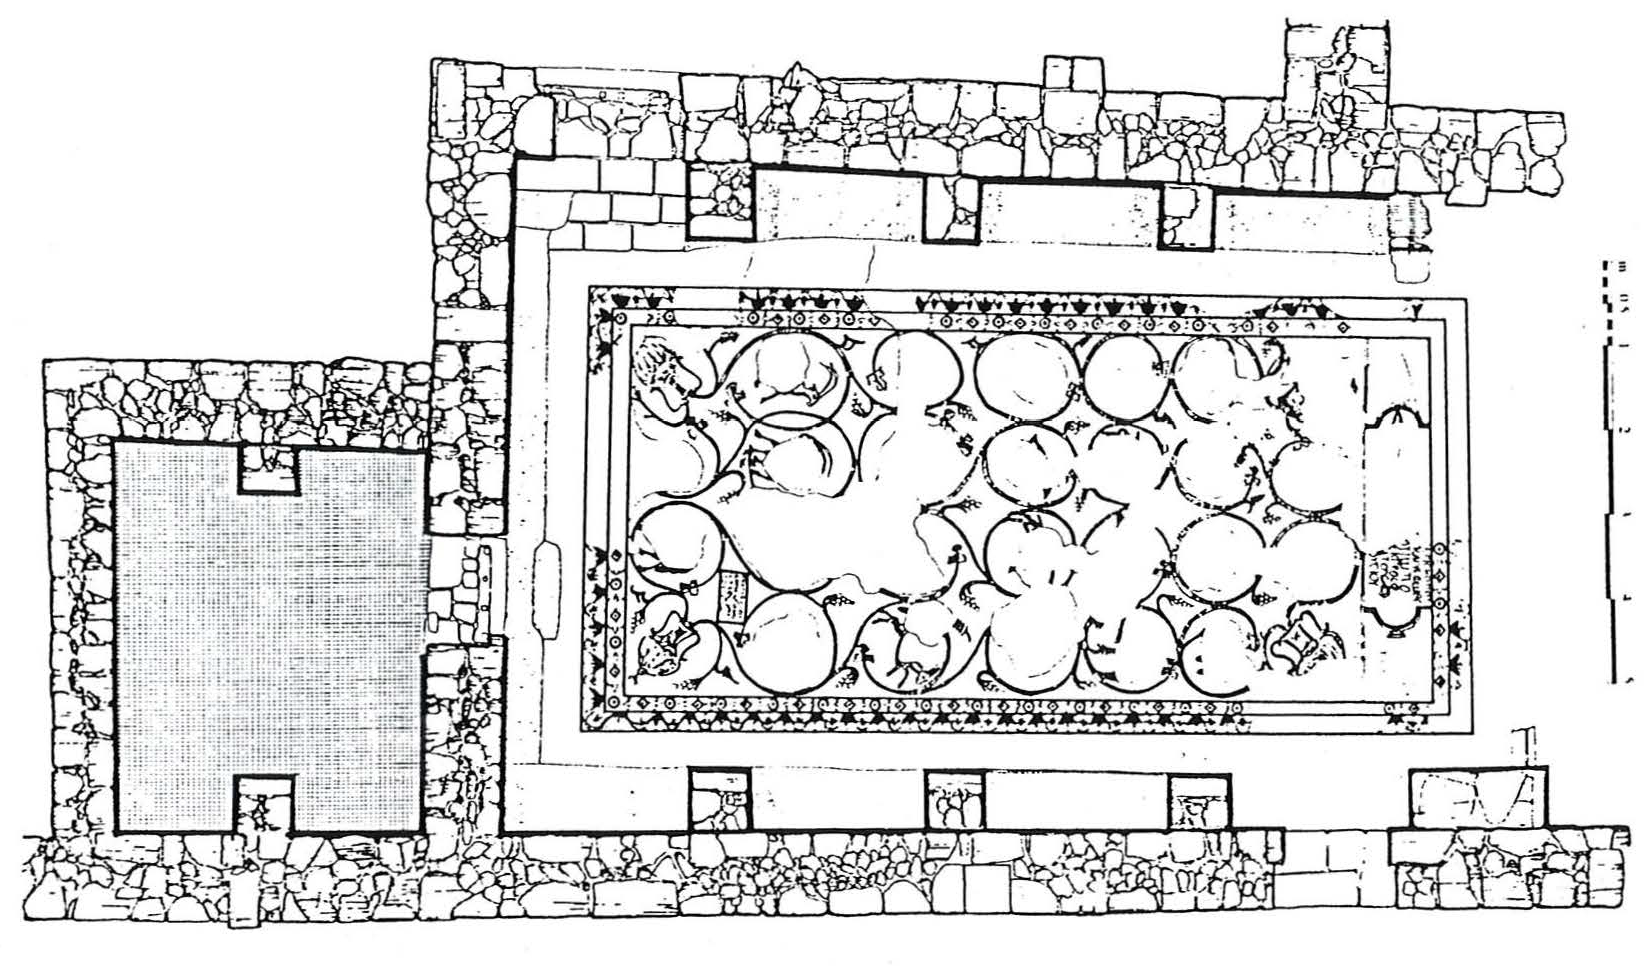 Michele Piccirillo, The Mosaics of Jordan, American Center of Oriental Research Publications; No. 1 (Amman, Jordan: American Center of Oriental Research, 1993), 308, fig. 614.